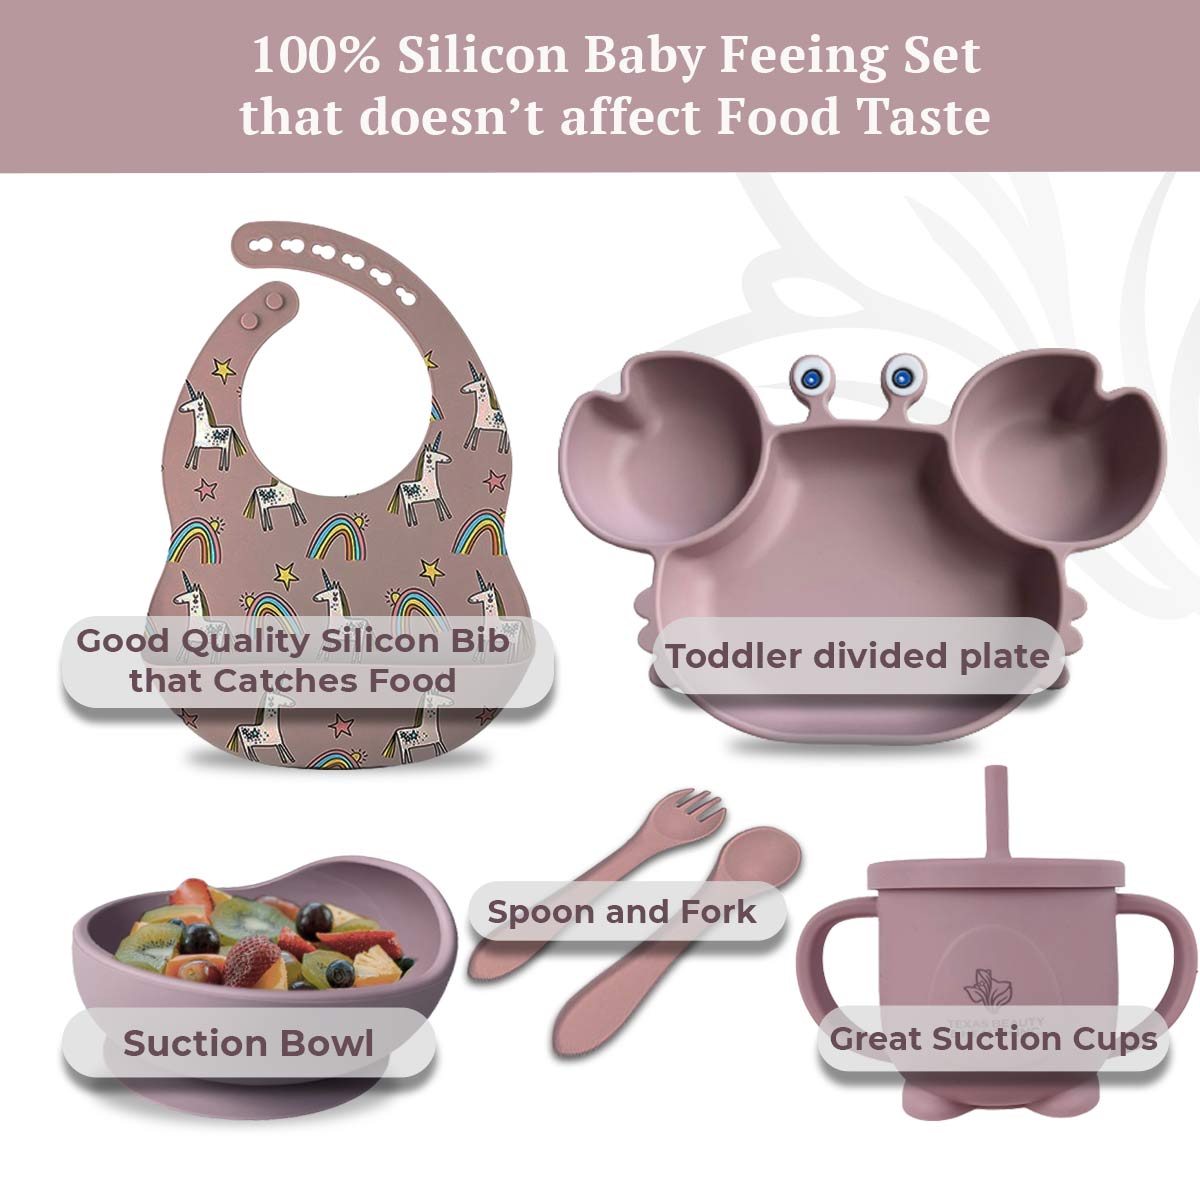 Texas Beauty & Health Rainbow Unicorn Dreams | Light Pink Silicone Baby Feeding Set for Girls | Suction Bowl, Divided Plate, Bib, Cup, Spoon, and Fork